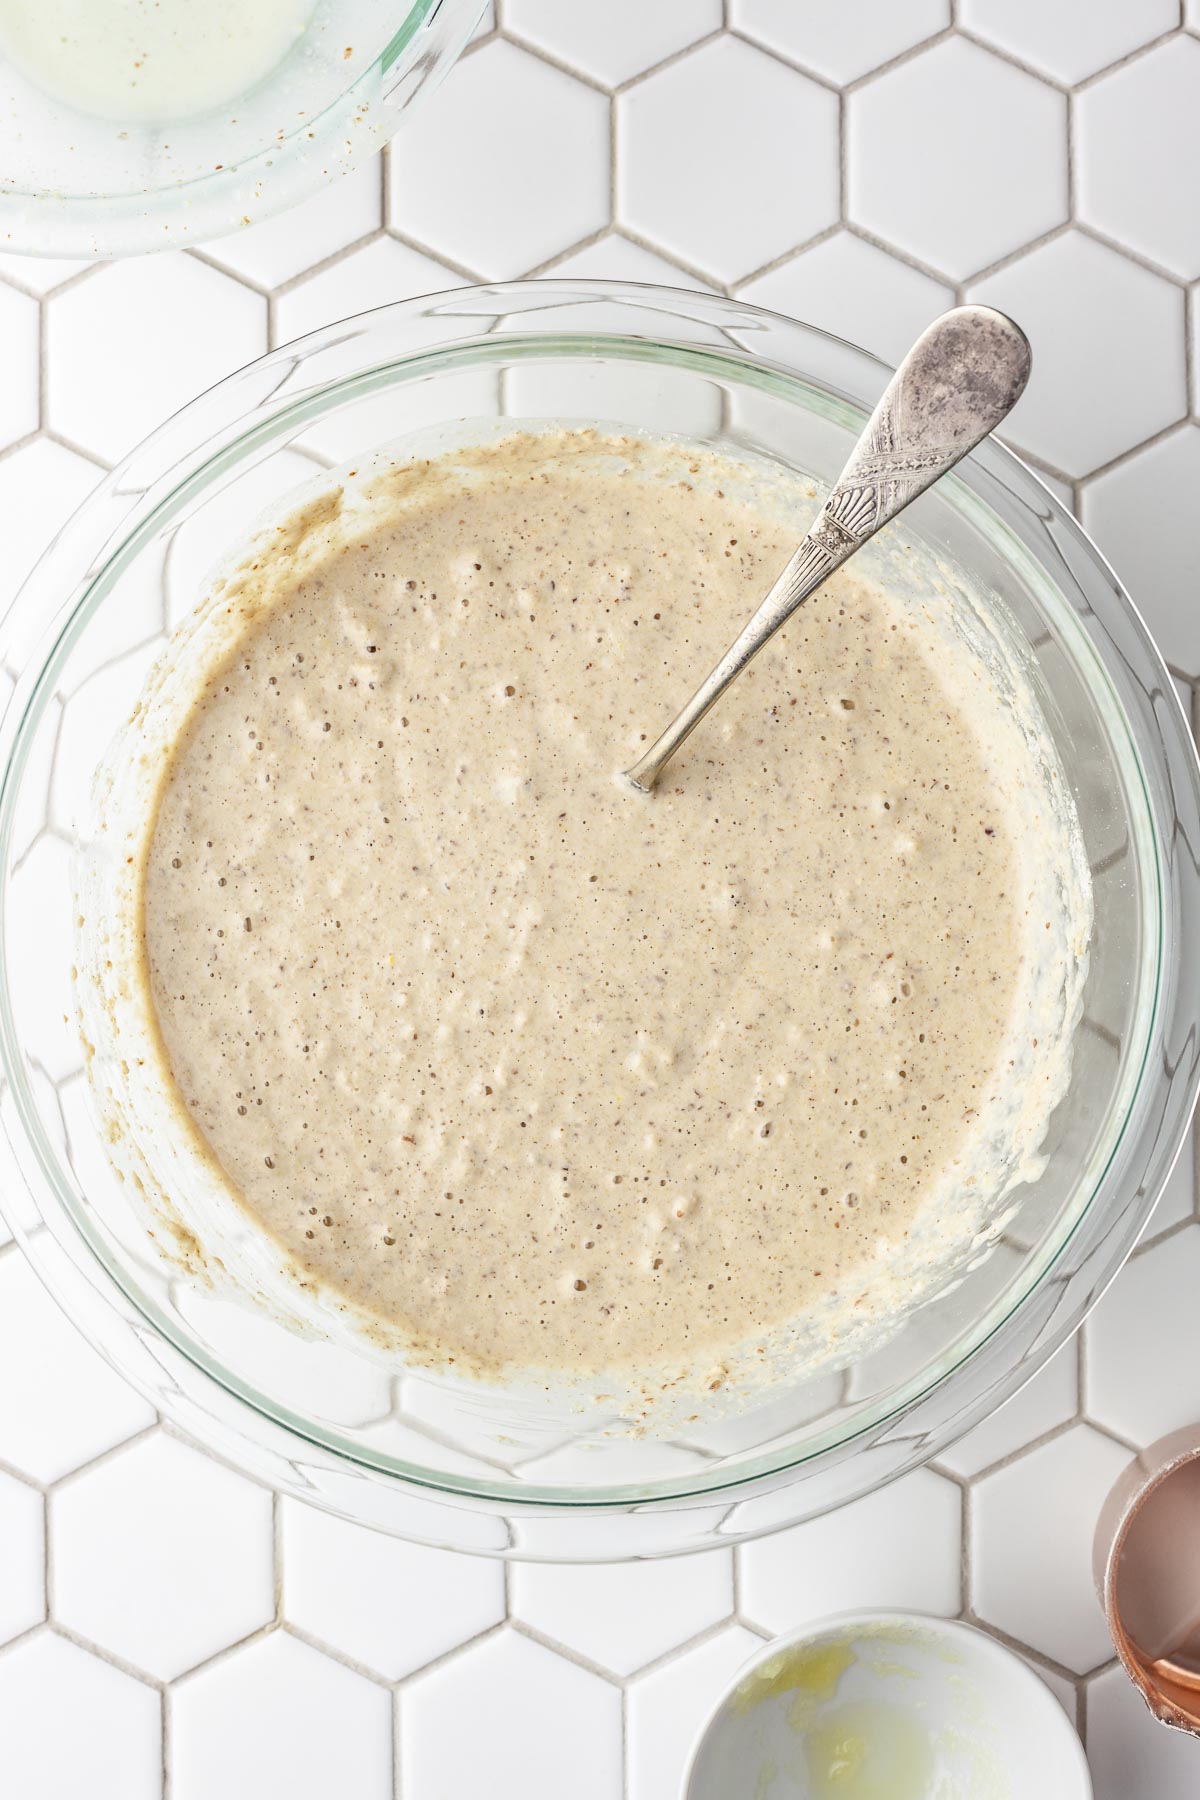 Overhead view of a bowl of oat flour pancake batter.